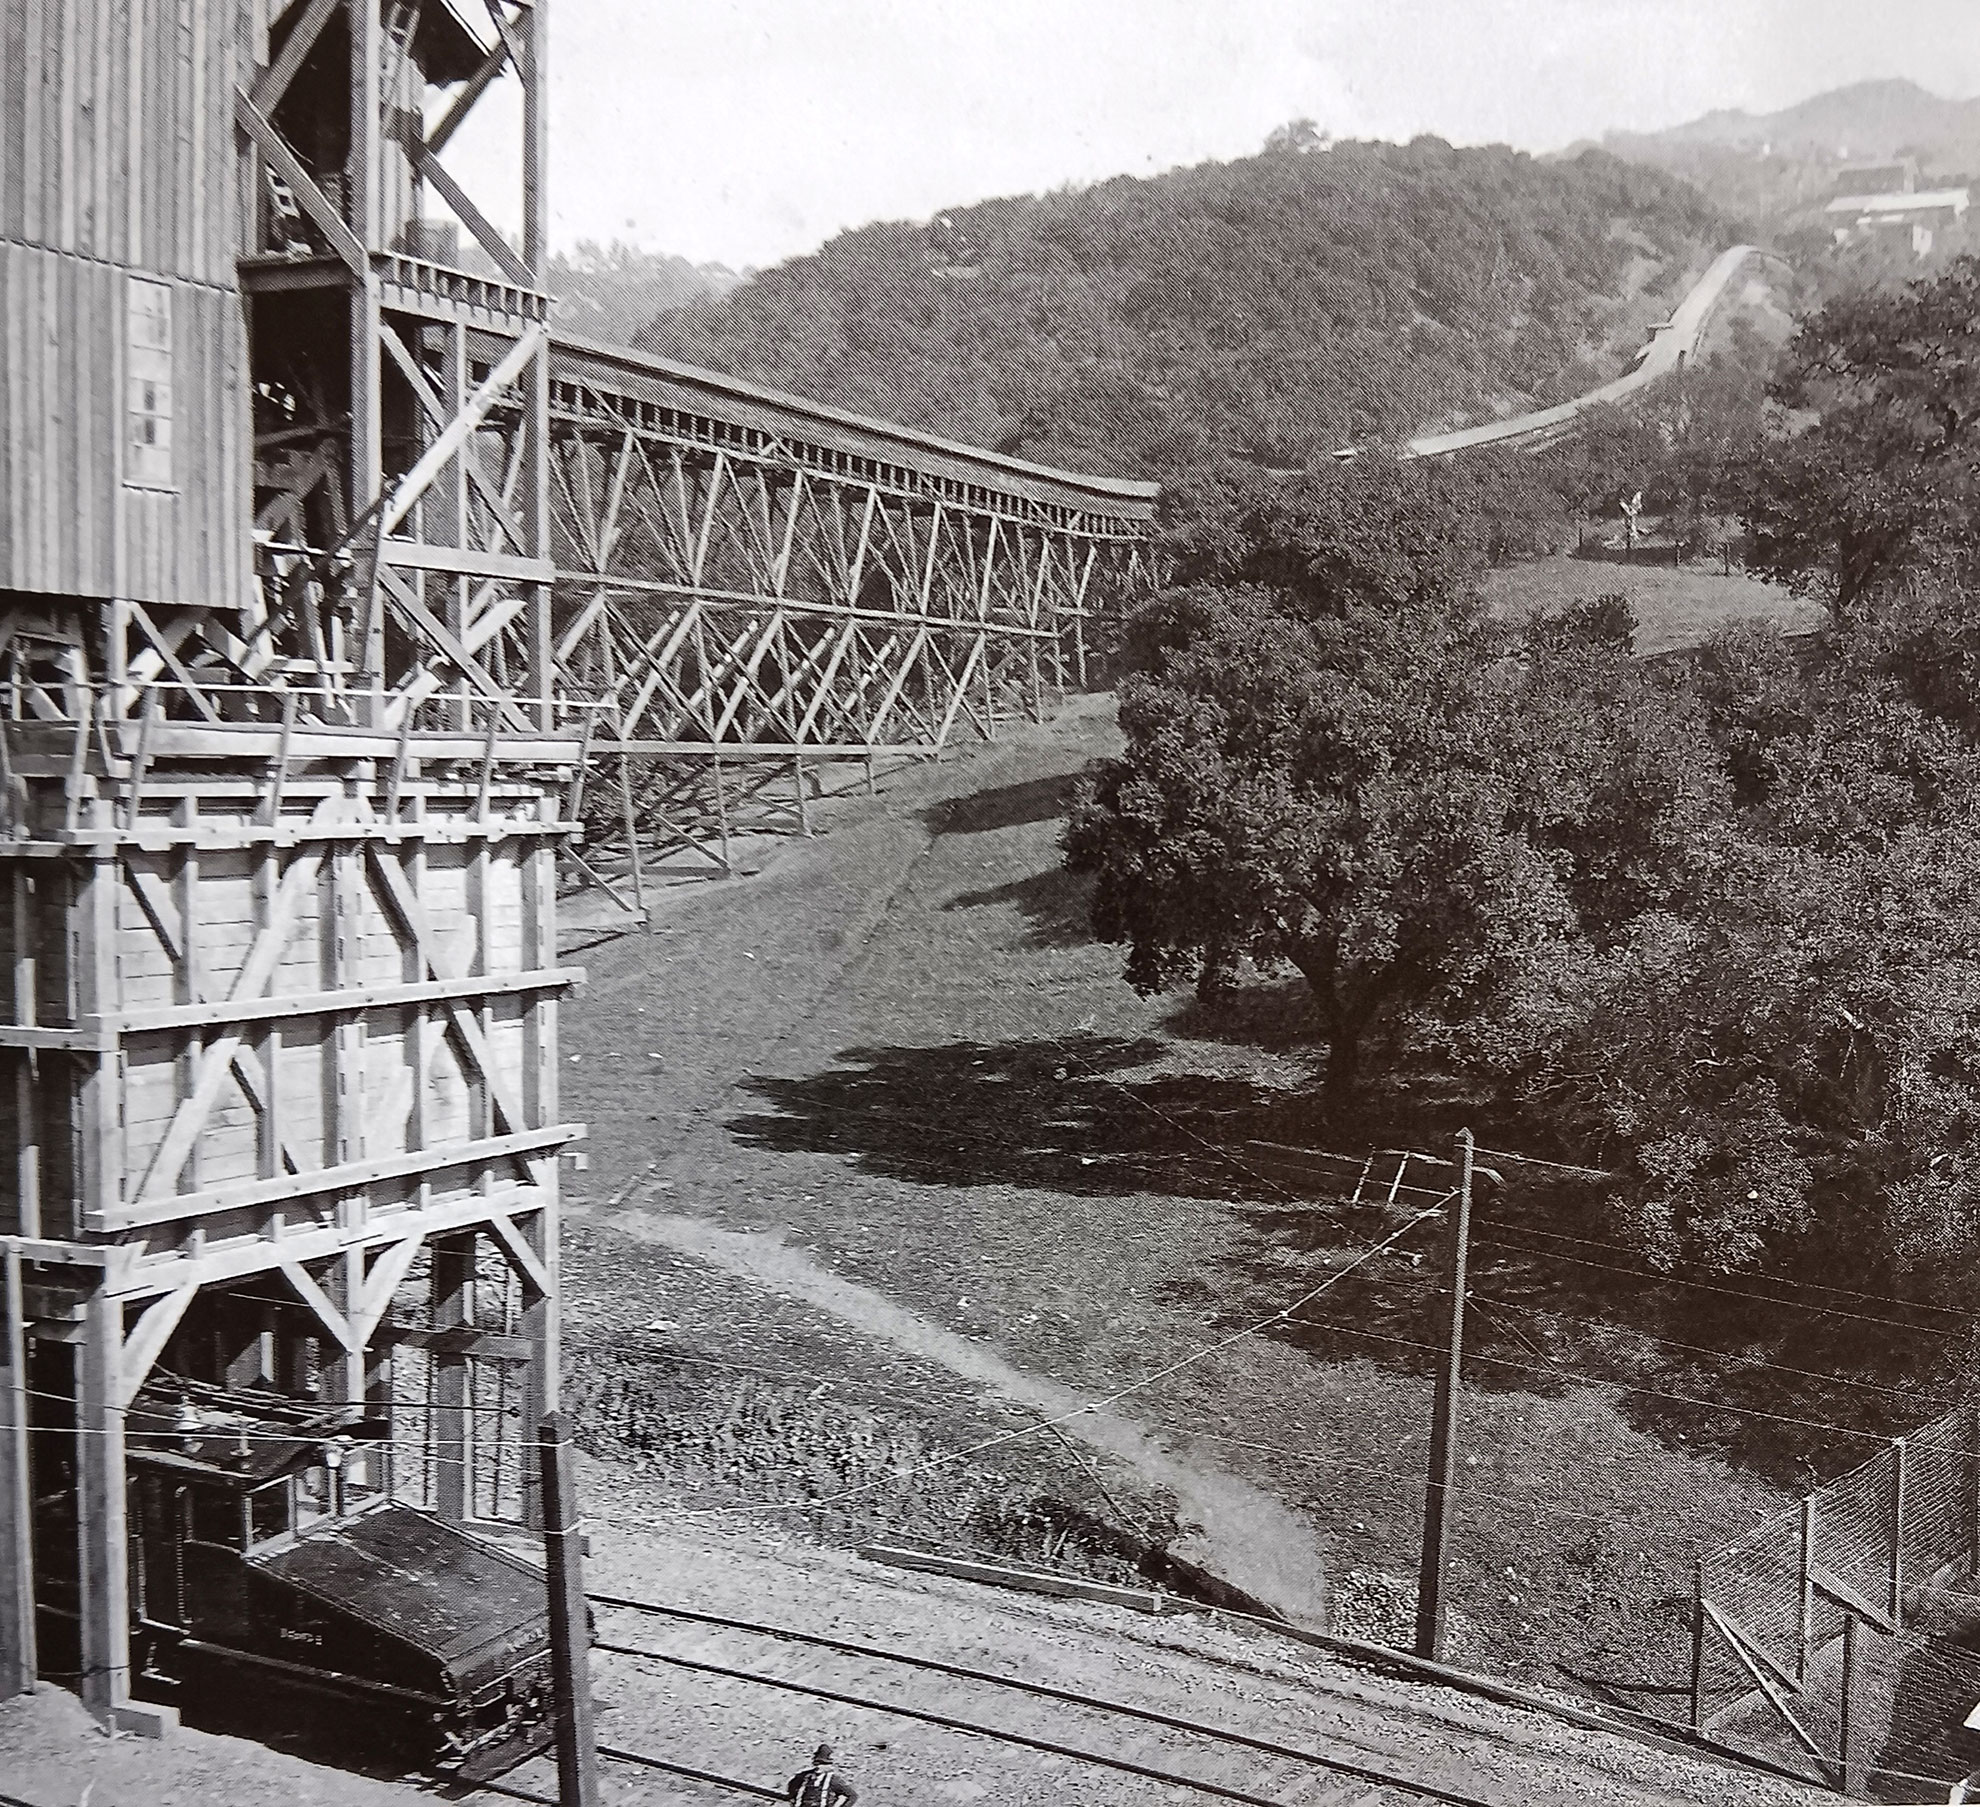 Black and white photo of a wooden trestle conveyor tram snaking its way up a wooded hill.